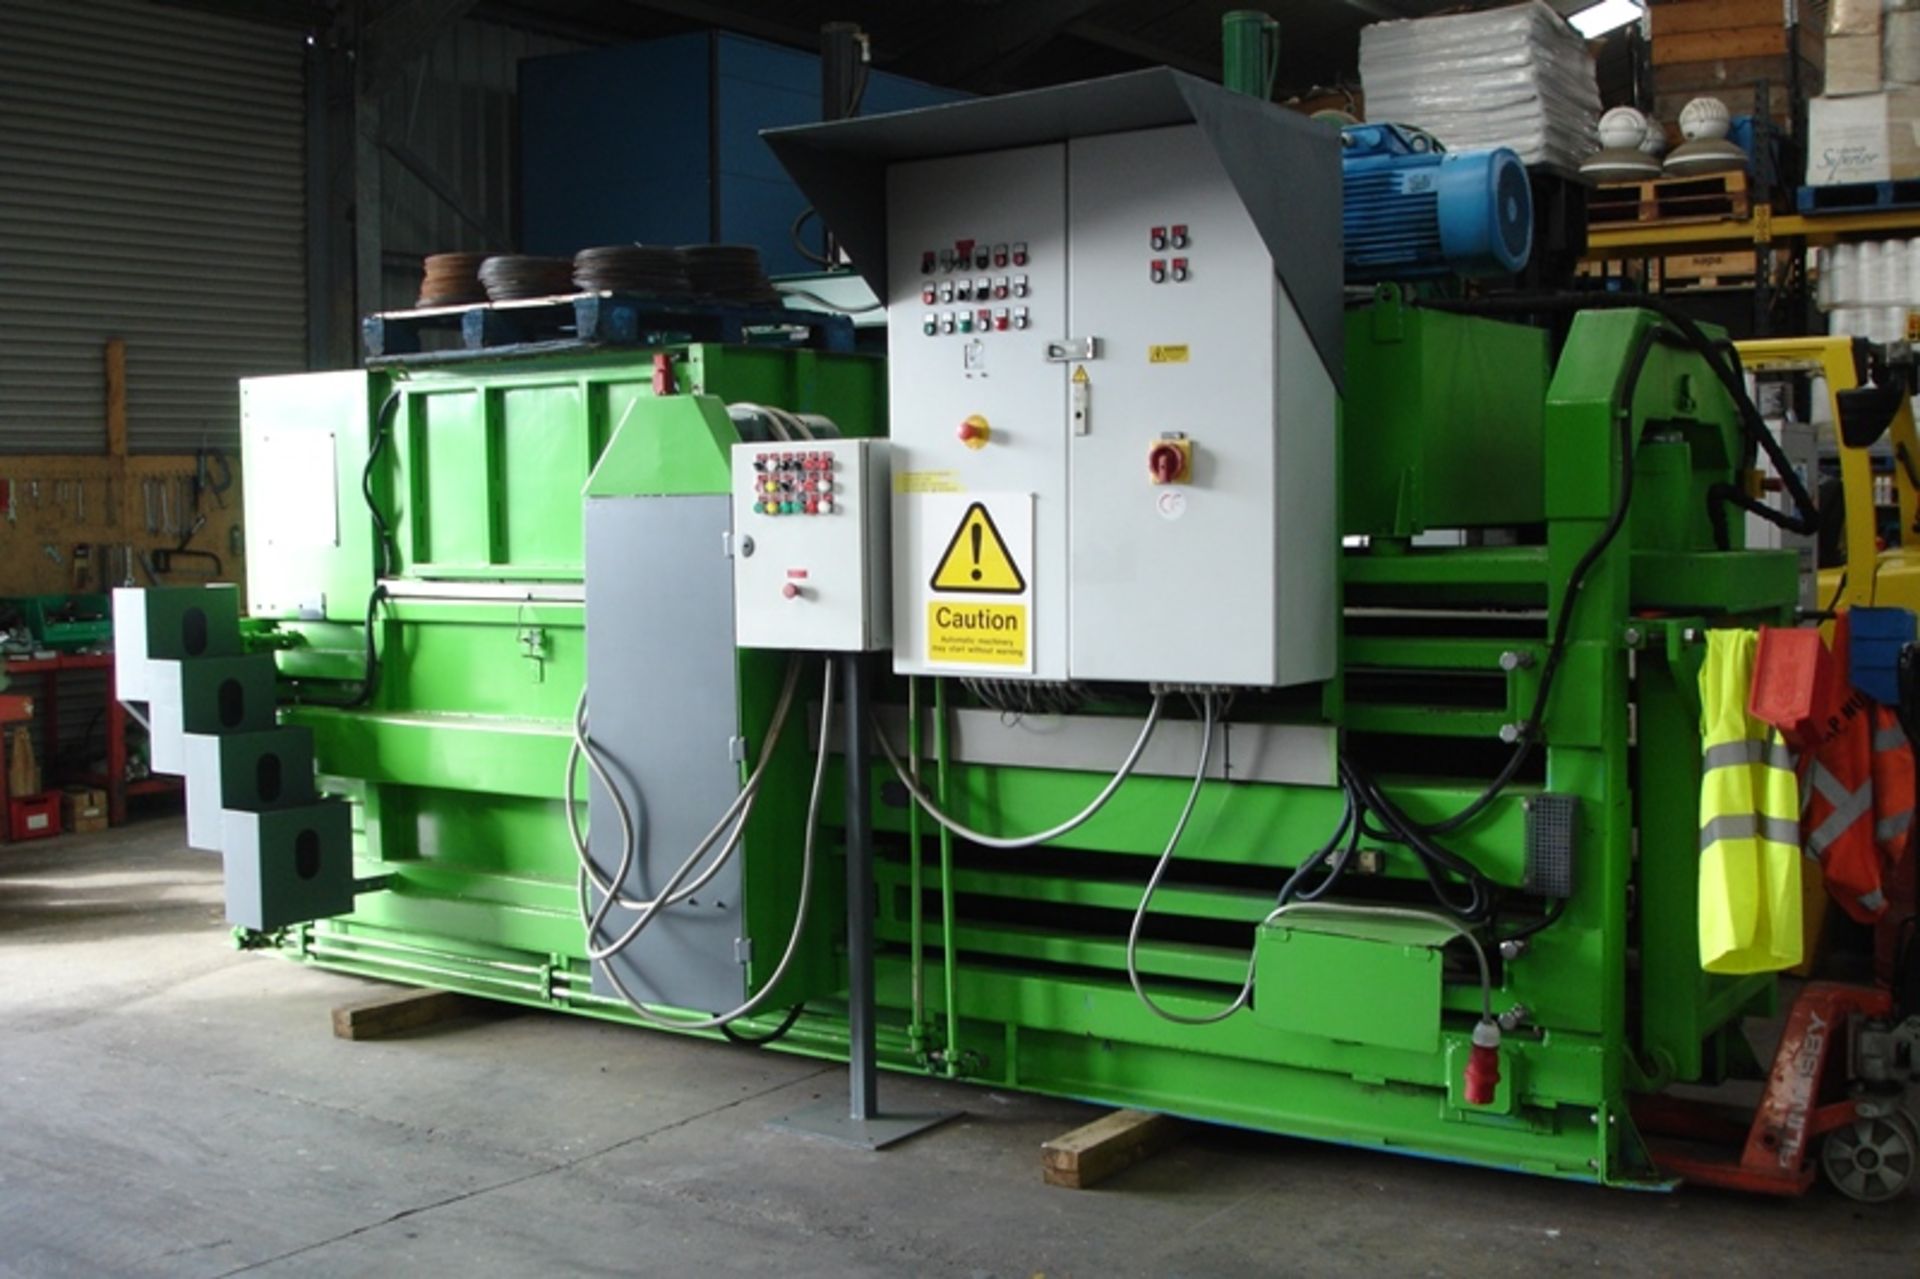 FAKT BP 4000 Fully Automatic Compact Baler (2012) - Image 2 of 6